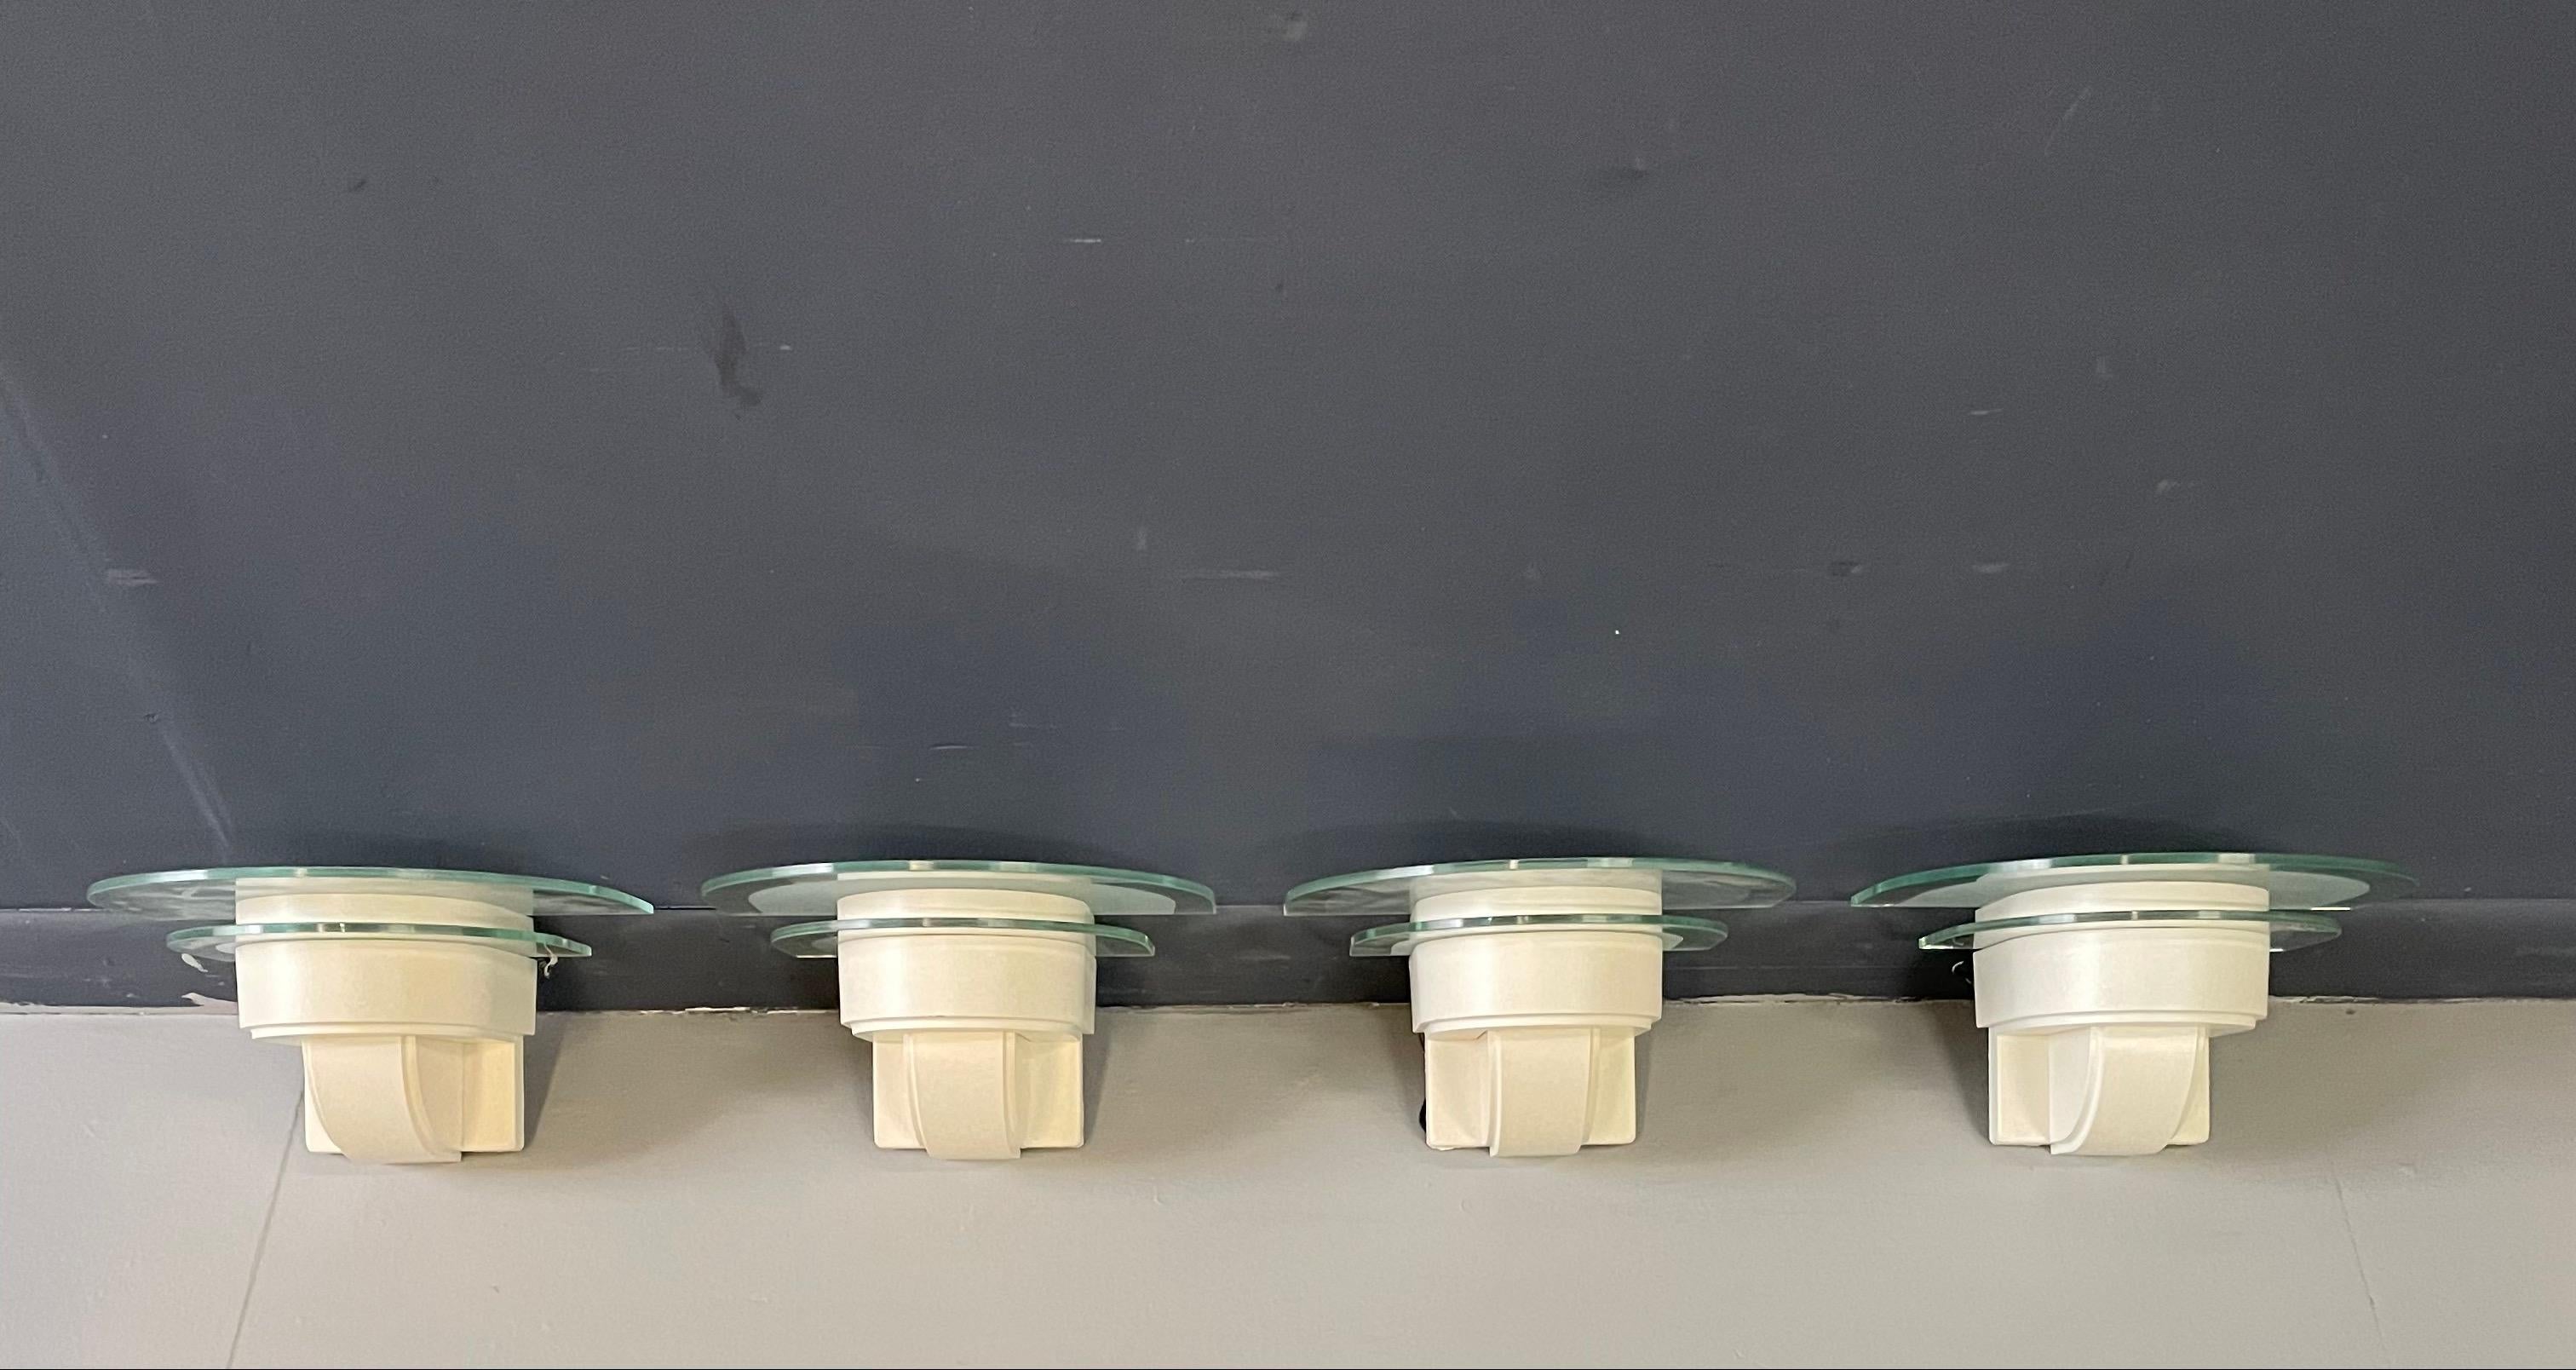 Quintessential 1980s style scones reminiscent of the work of architect Richard Meier. Each sconce has two glass semi-circle glass shades the larger top one is part frosted.

There are four sconces total available in pairs.